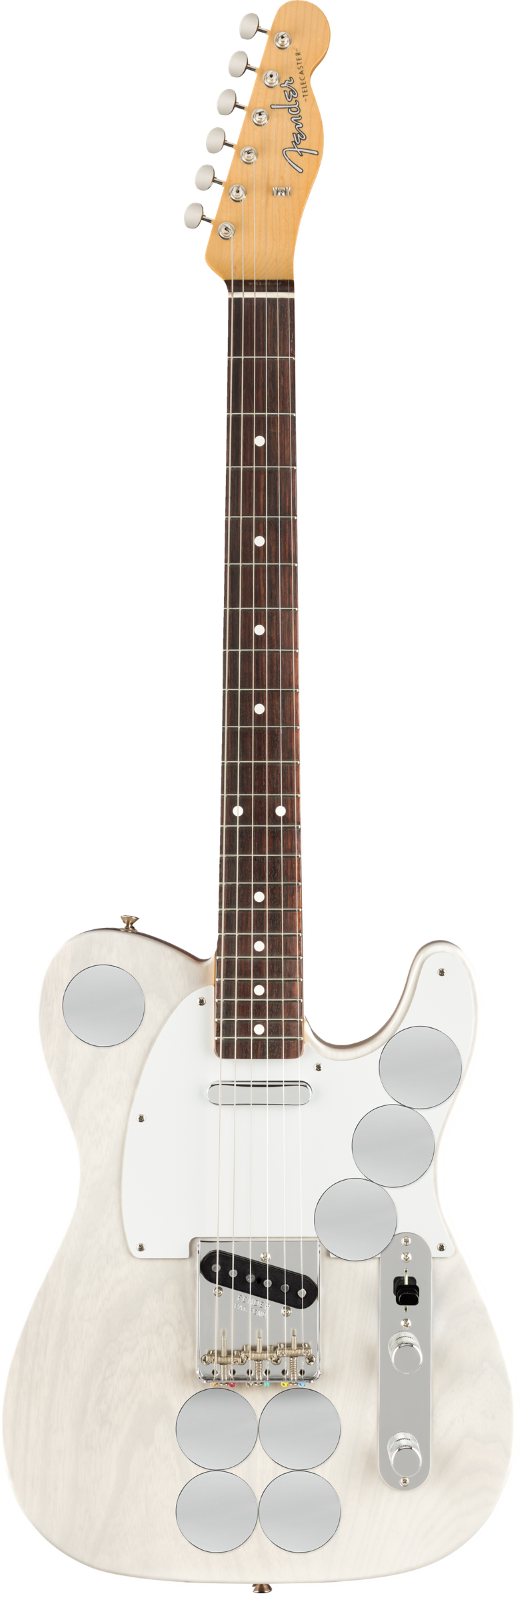 Fender Artist Series - Telecaster Jimmy Page Mirror, Rosewood Fingerboard, White Blonde : photo 1